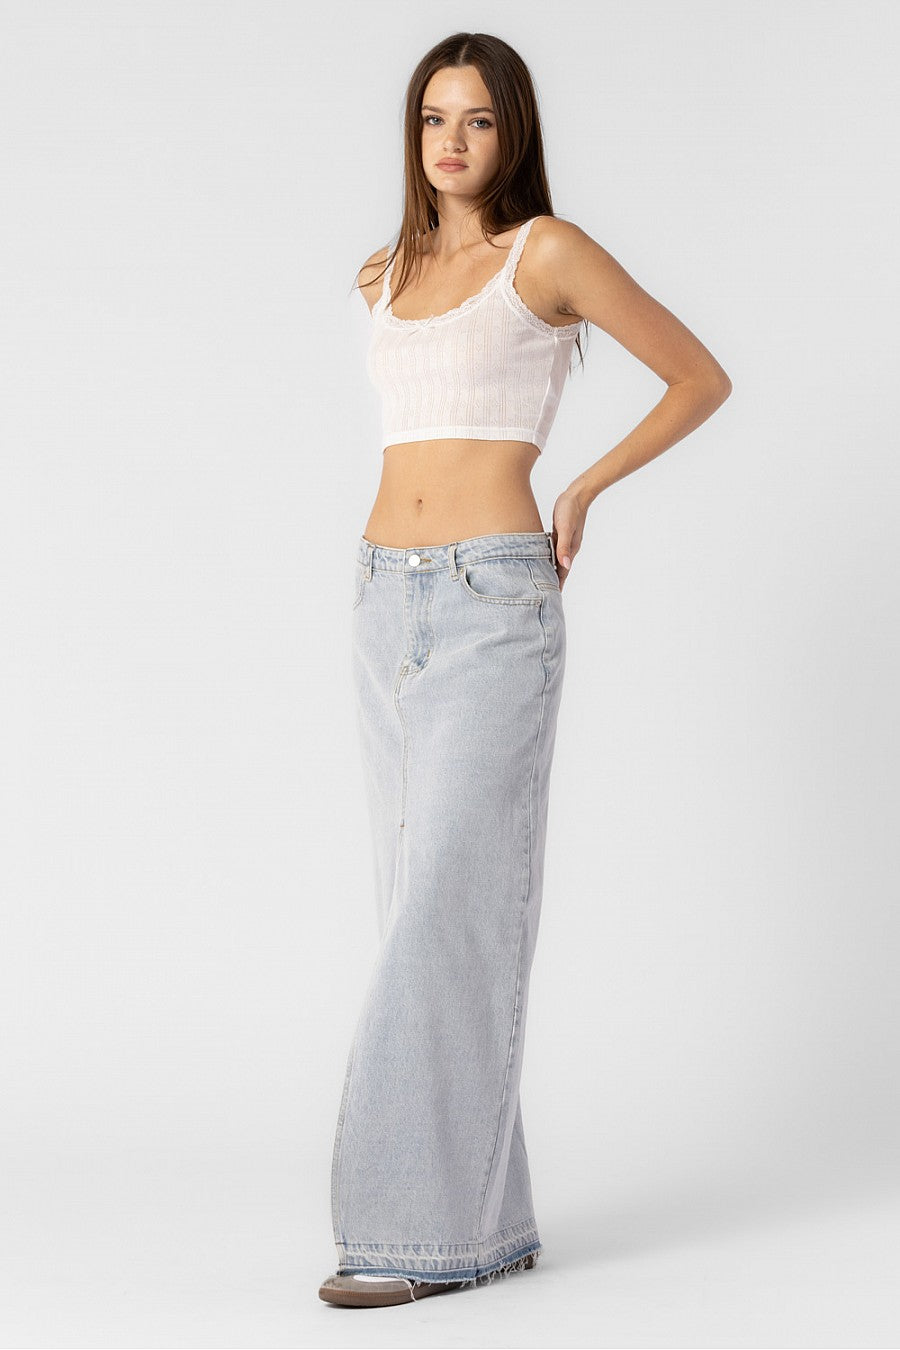 Model is wearing a maxi denim skirt with front slit.